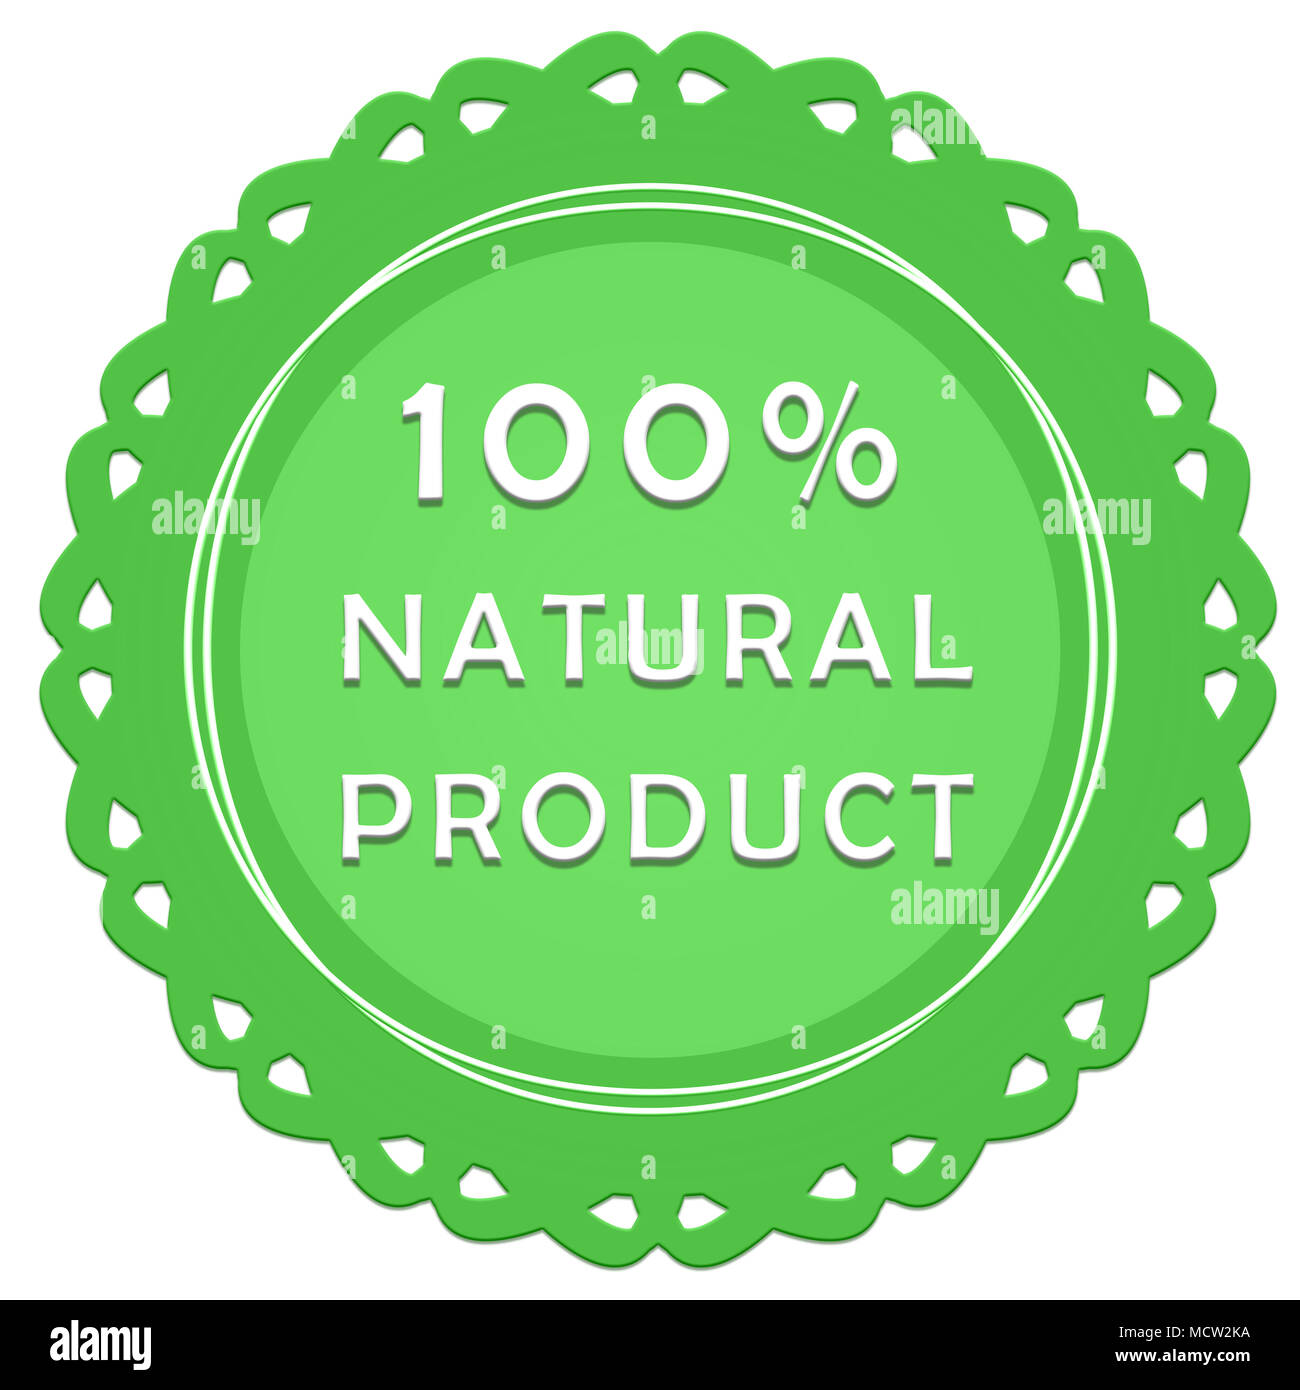 100% natural product label. Vintage tag on a white background Stock Photo